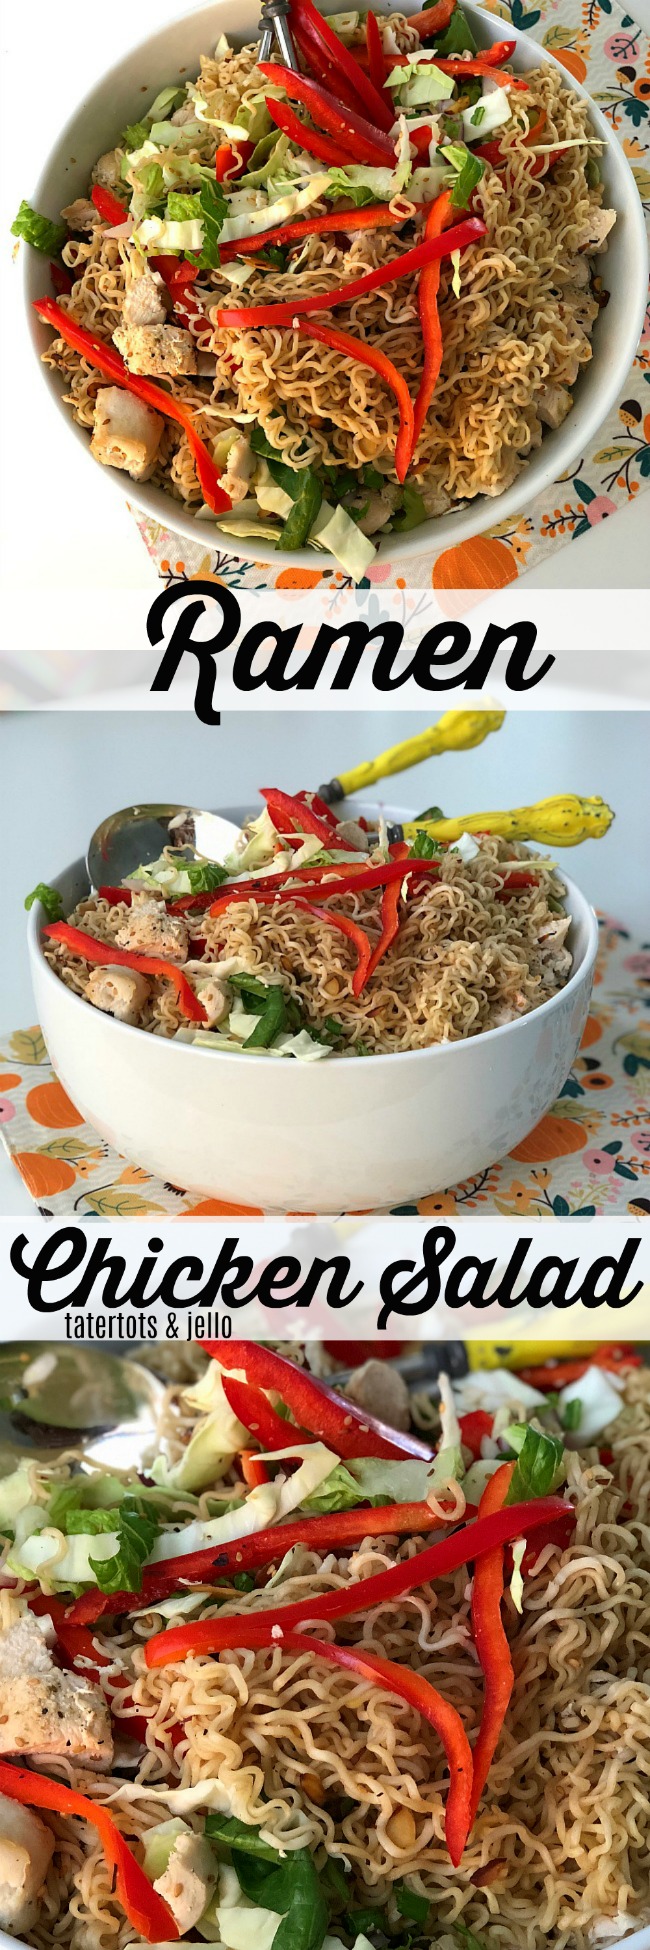 Chinese Chicken Salad is a family secret. Full of crisp cabbage, veggies, filling chicken breasts and topped with ramen noodles. Kids AND parents love it! 